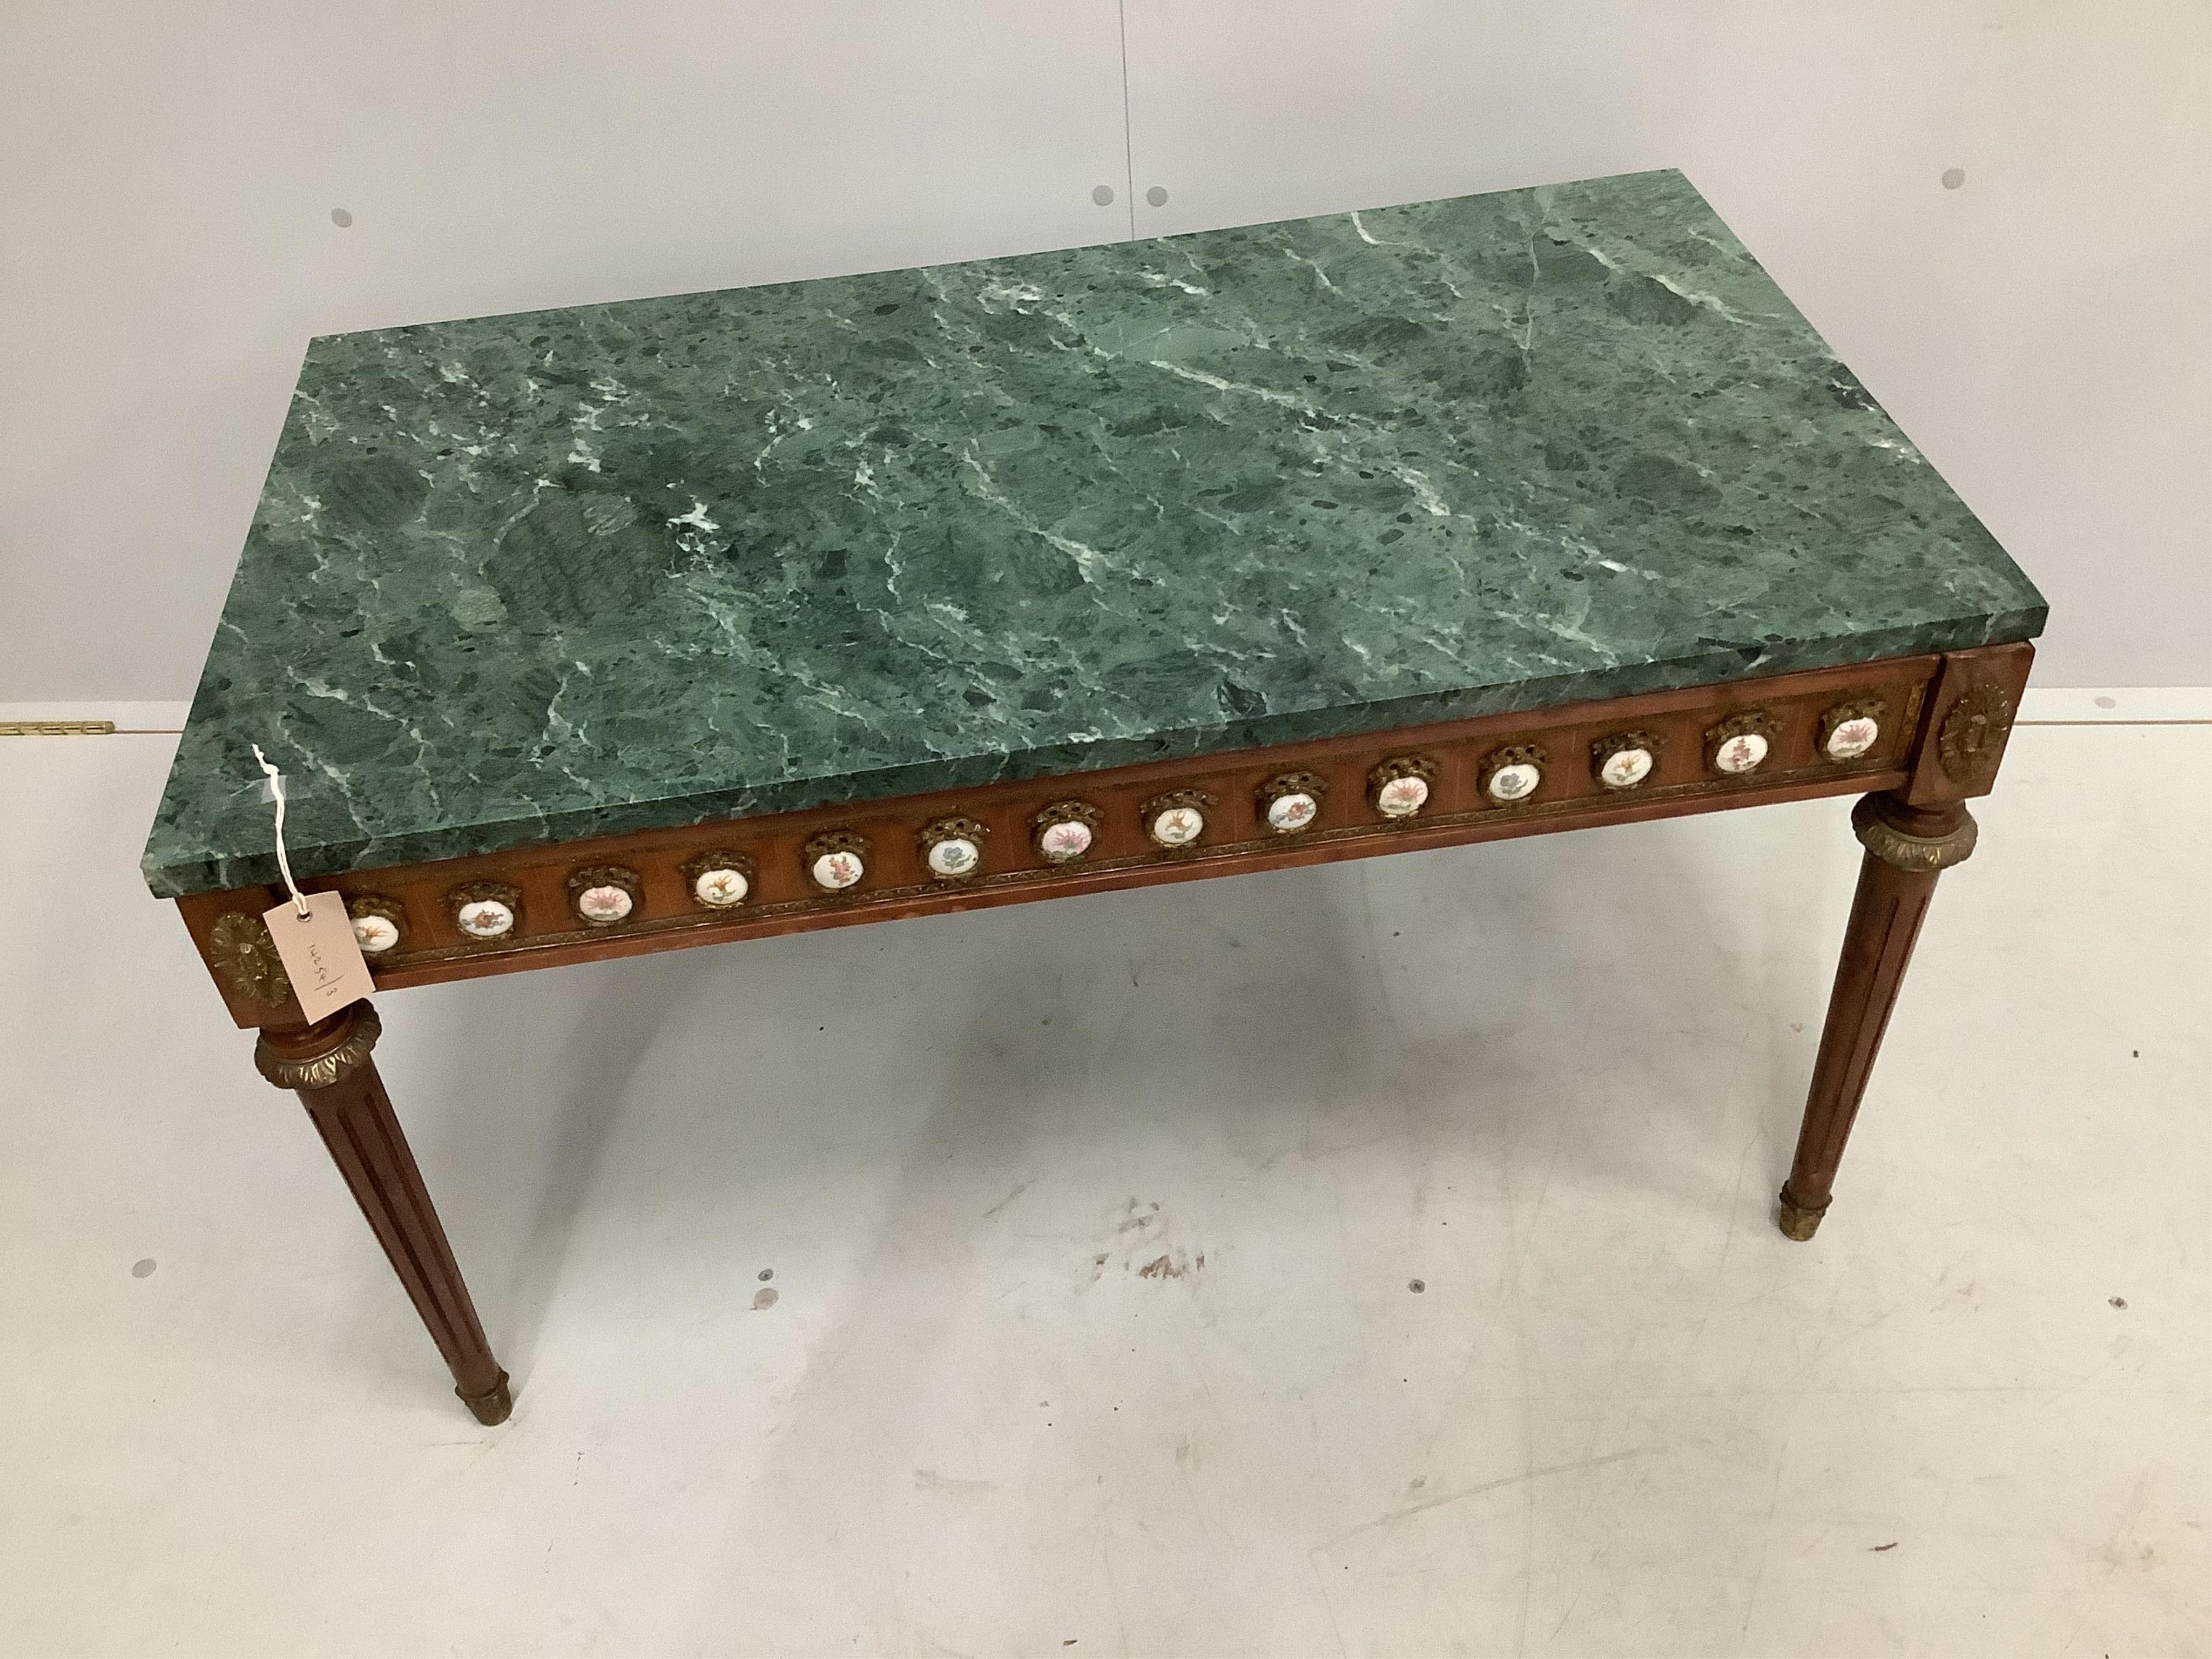 A Louis XVI style rectangular gilt metal and porcelain mounted marble top mahogany coffee table, width 92cm, depth 52cm, height 51cm. Condition - fair